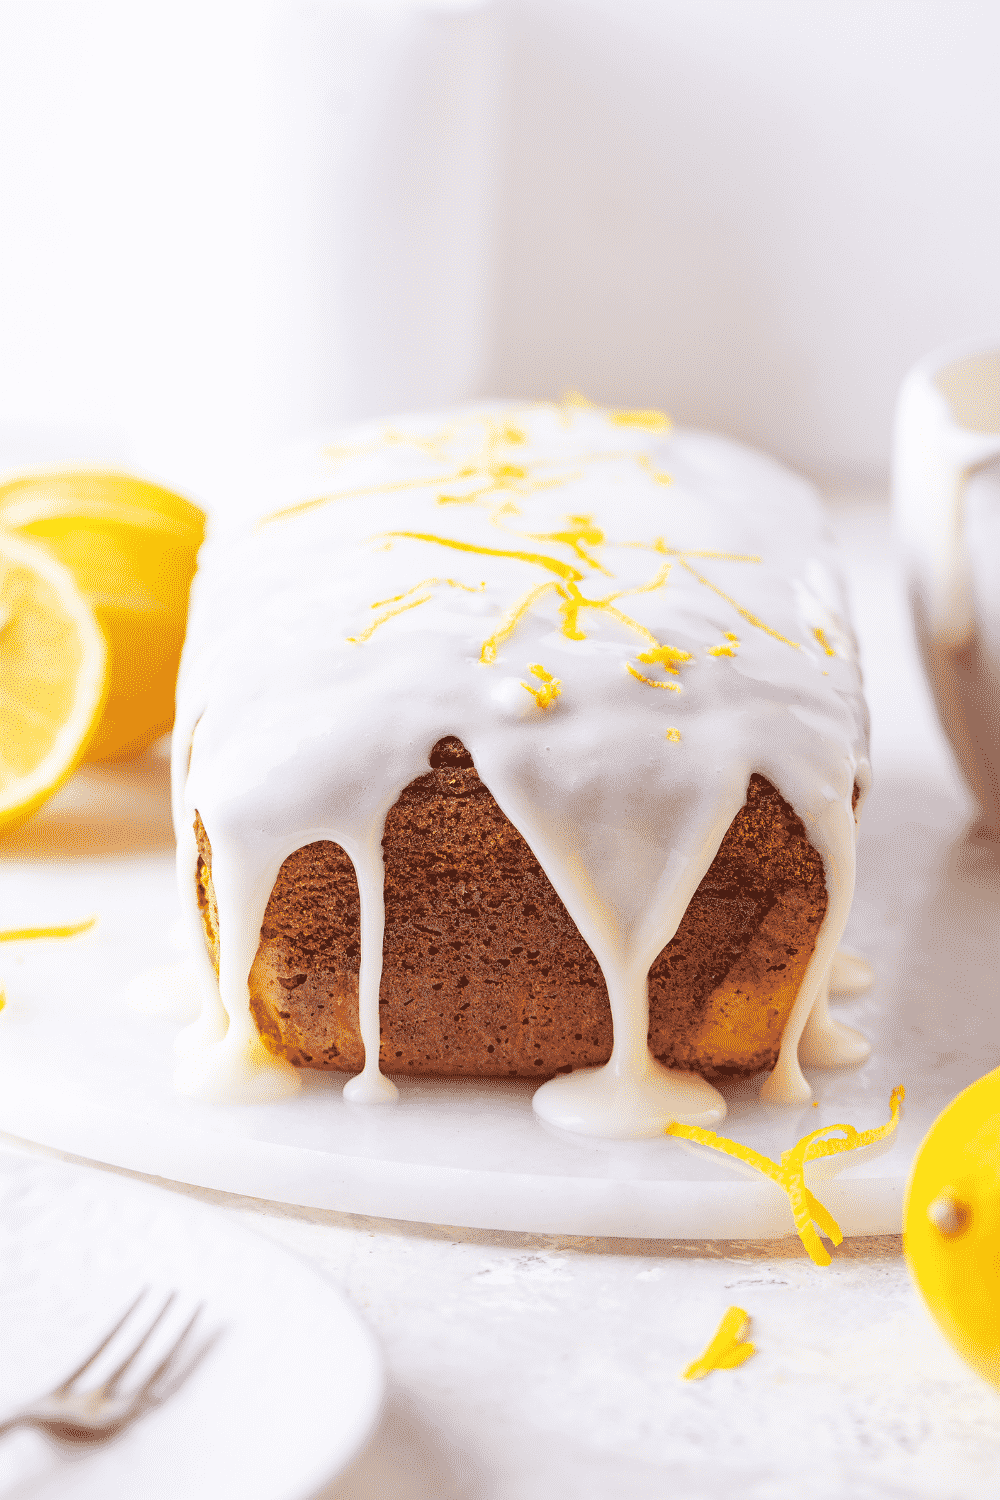 A loaf of keto lemon pound cake with keto glaze dripping down the side front of the cake. There is a lemon zest on top of the white glaze. The low carb lemon pound cake is on a white saucer on a white table.